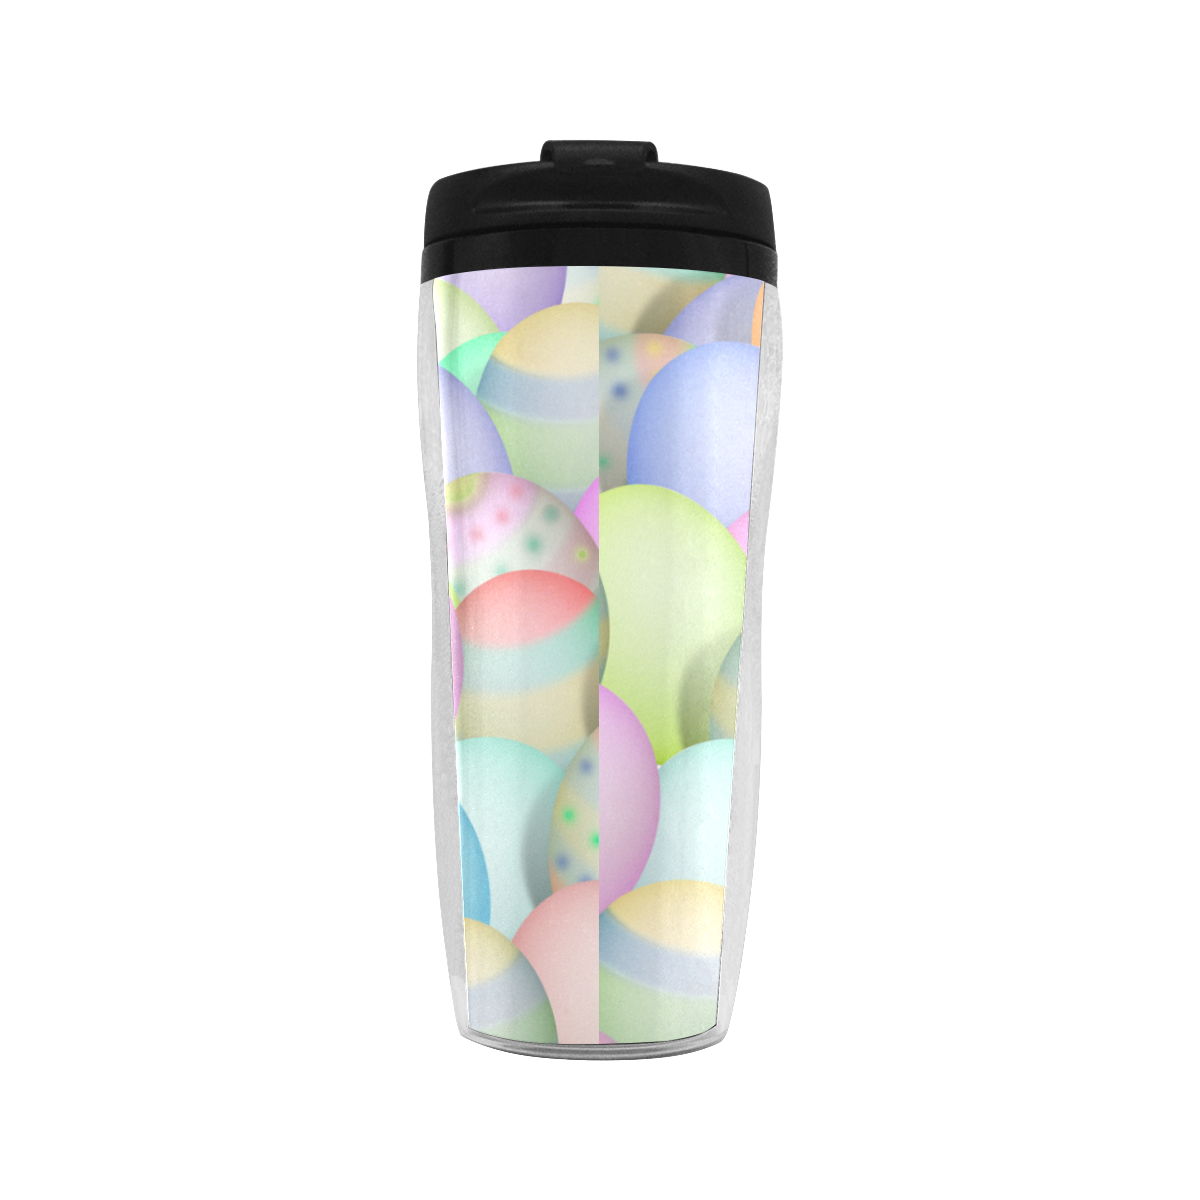 Pastel Colored Easter Eggs Reusable Coffee Cup (11.8oz)